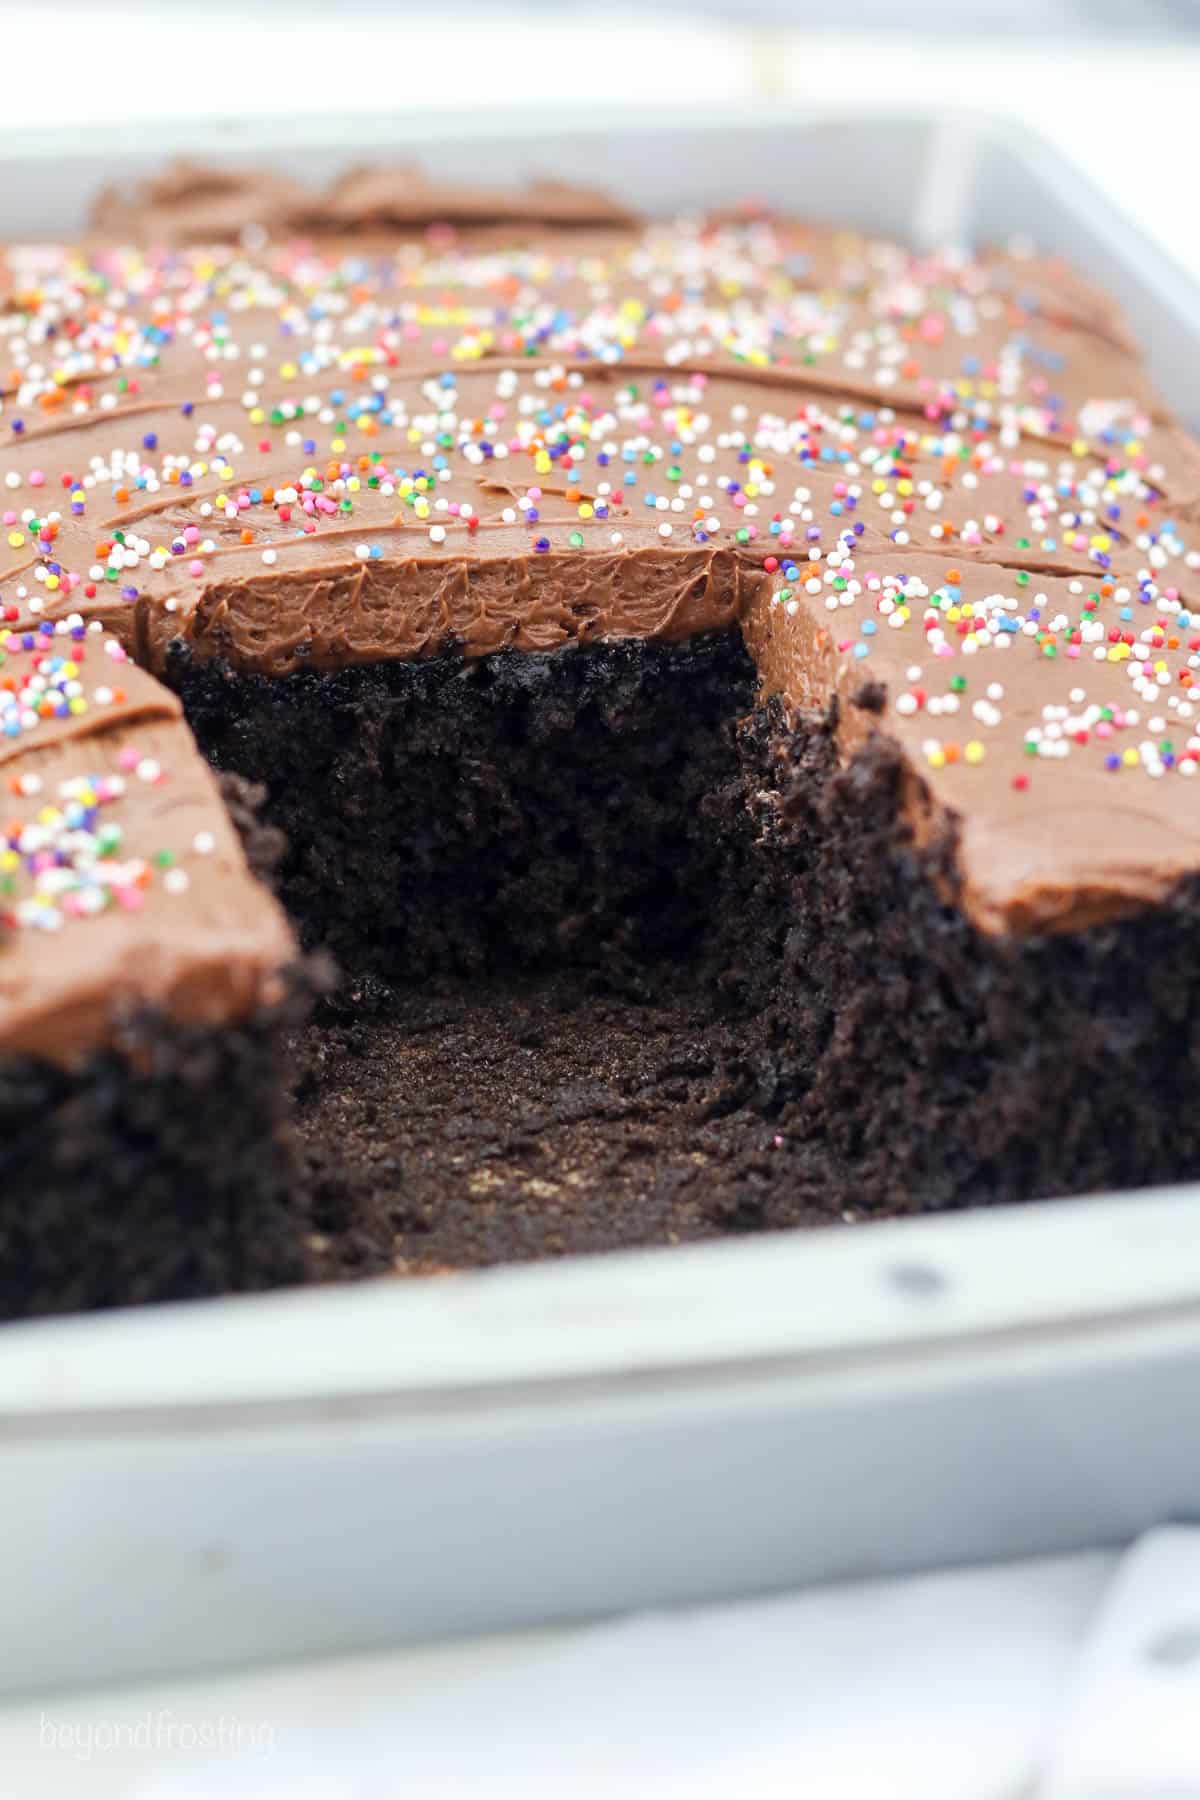 Frosted chocolate cake topped with sprinkles in a 9x13 baking dish with slices missing.